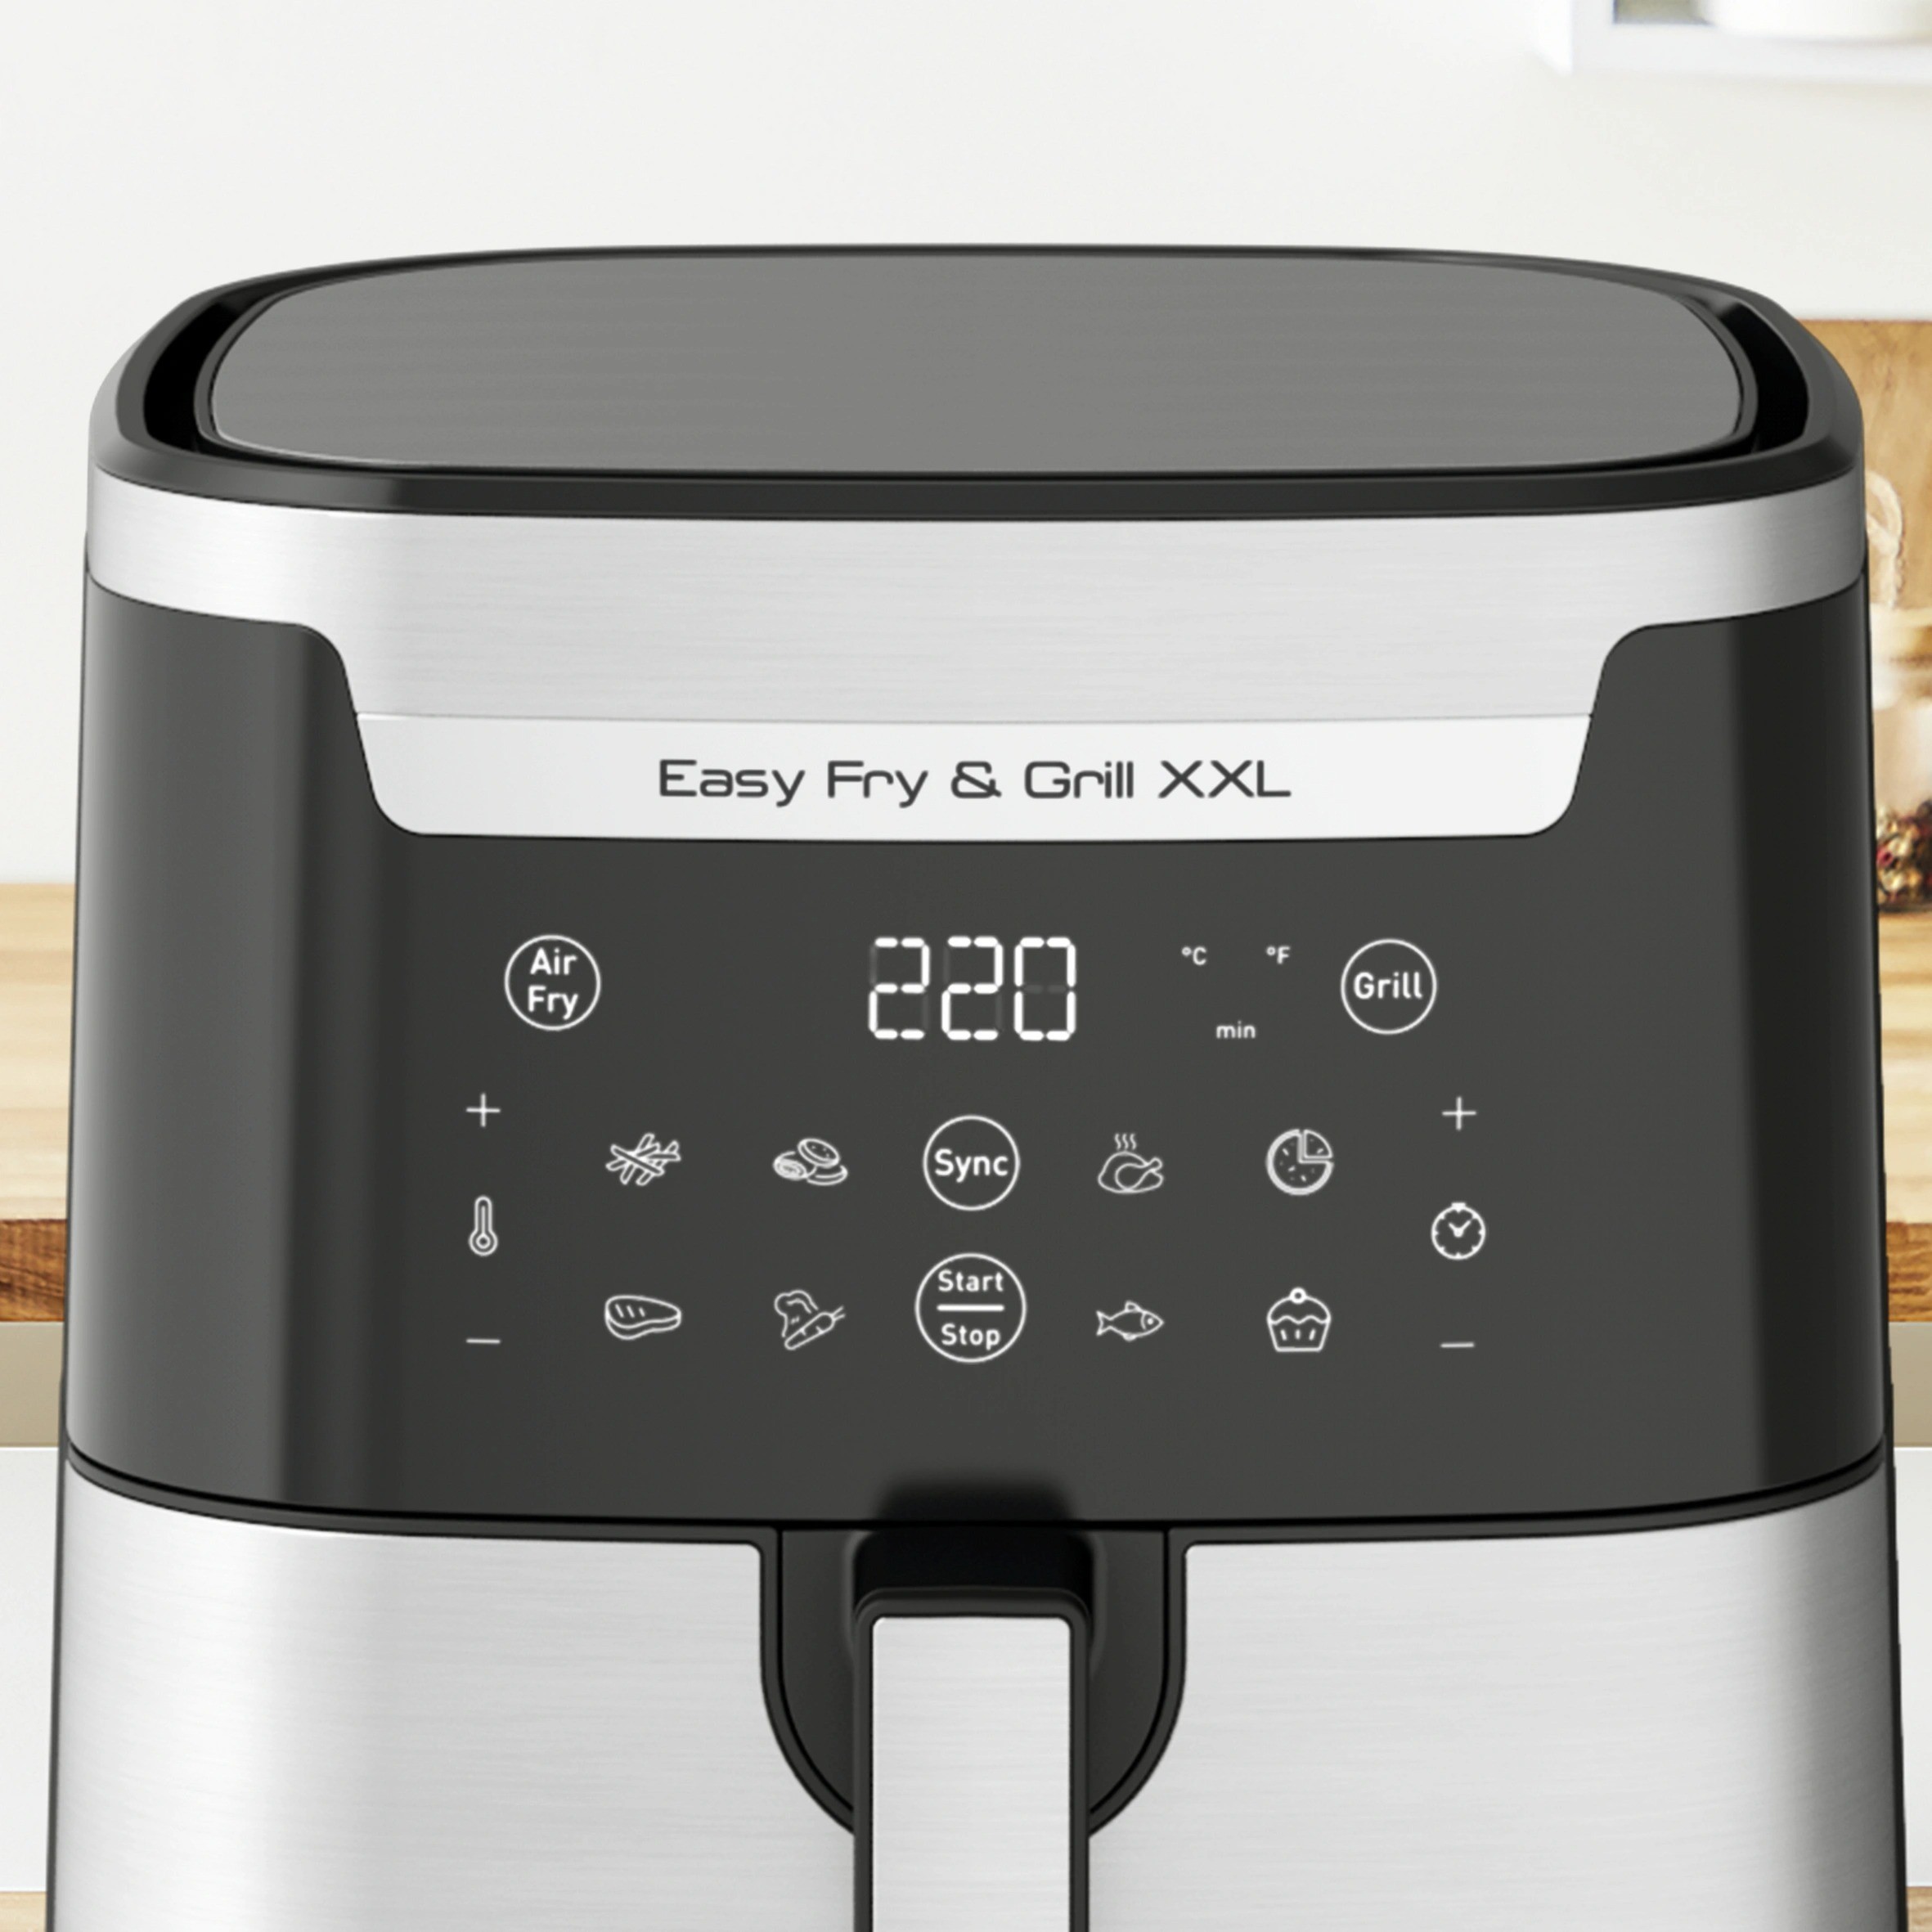 Easy fry grill. Tefal easy Fry. Аэрофритюрница Tefal easy Fry hot ey1018. Tefal easy Fry Grill &amp; Steam. Аэрогриль Tefal easy Fry Compact, 3 л ey145810.